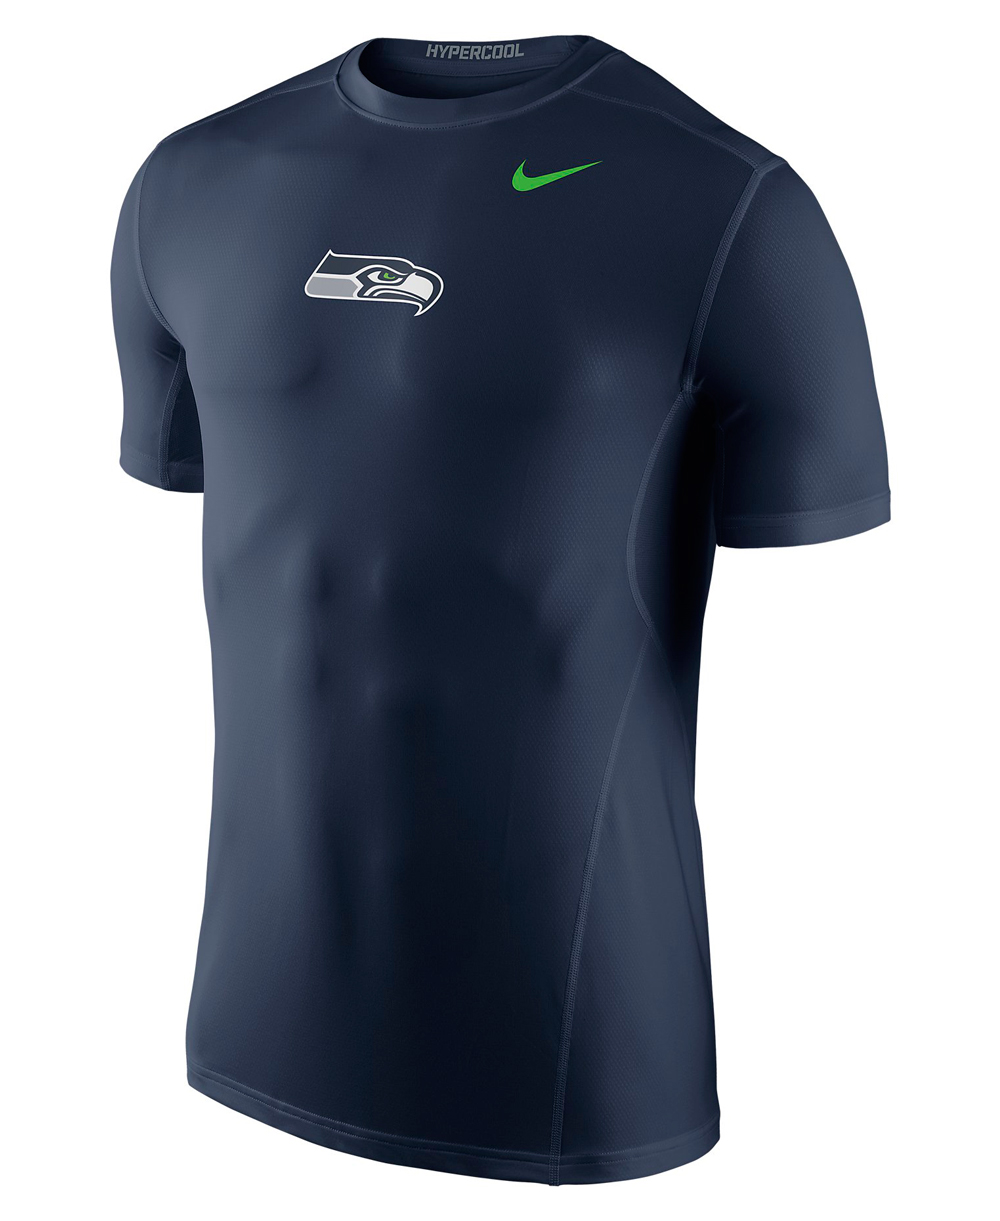 https://www.anygivensunday.shop/1818-large_default/nike-hypercool-fitted-mens-compression-shirt-nfl-seahawks.jpg